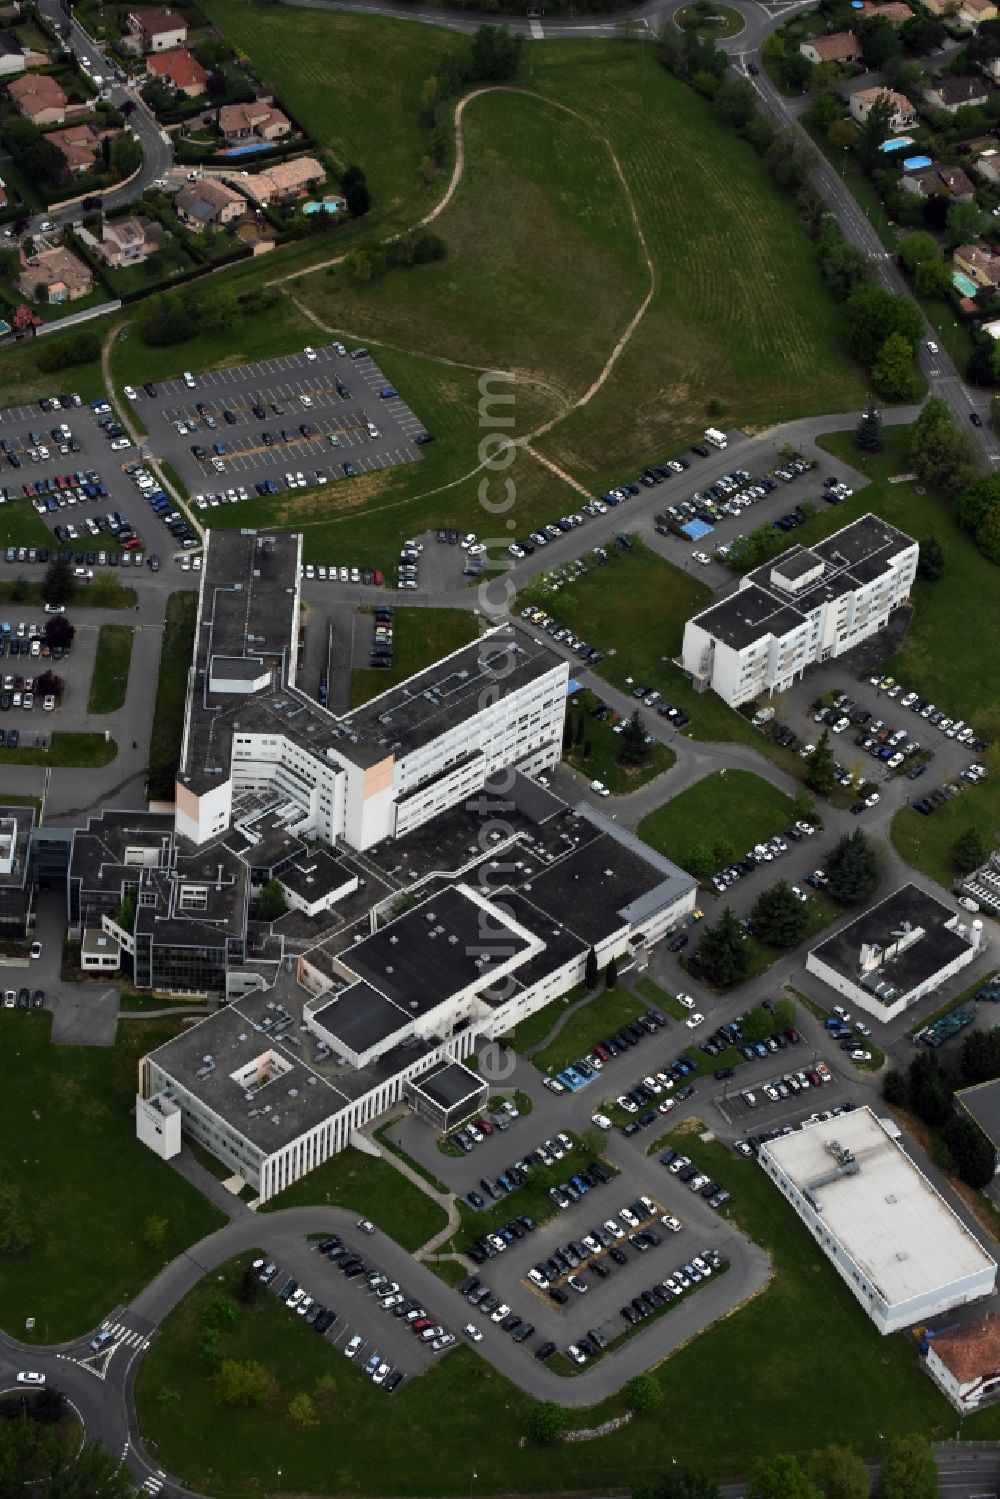 Aerial image Saint-Jean - Clinic of the hospital grounds Centre Chirurgie Main - Clinique de l'Union on Boulevard Ratalens in Saint-Jean in Languedoc-Roussillon Midi-Pyrenees, France